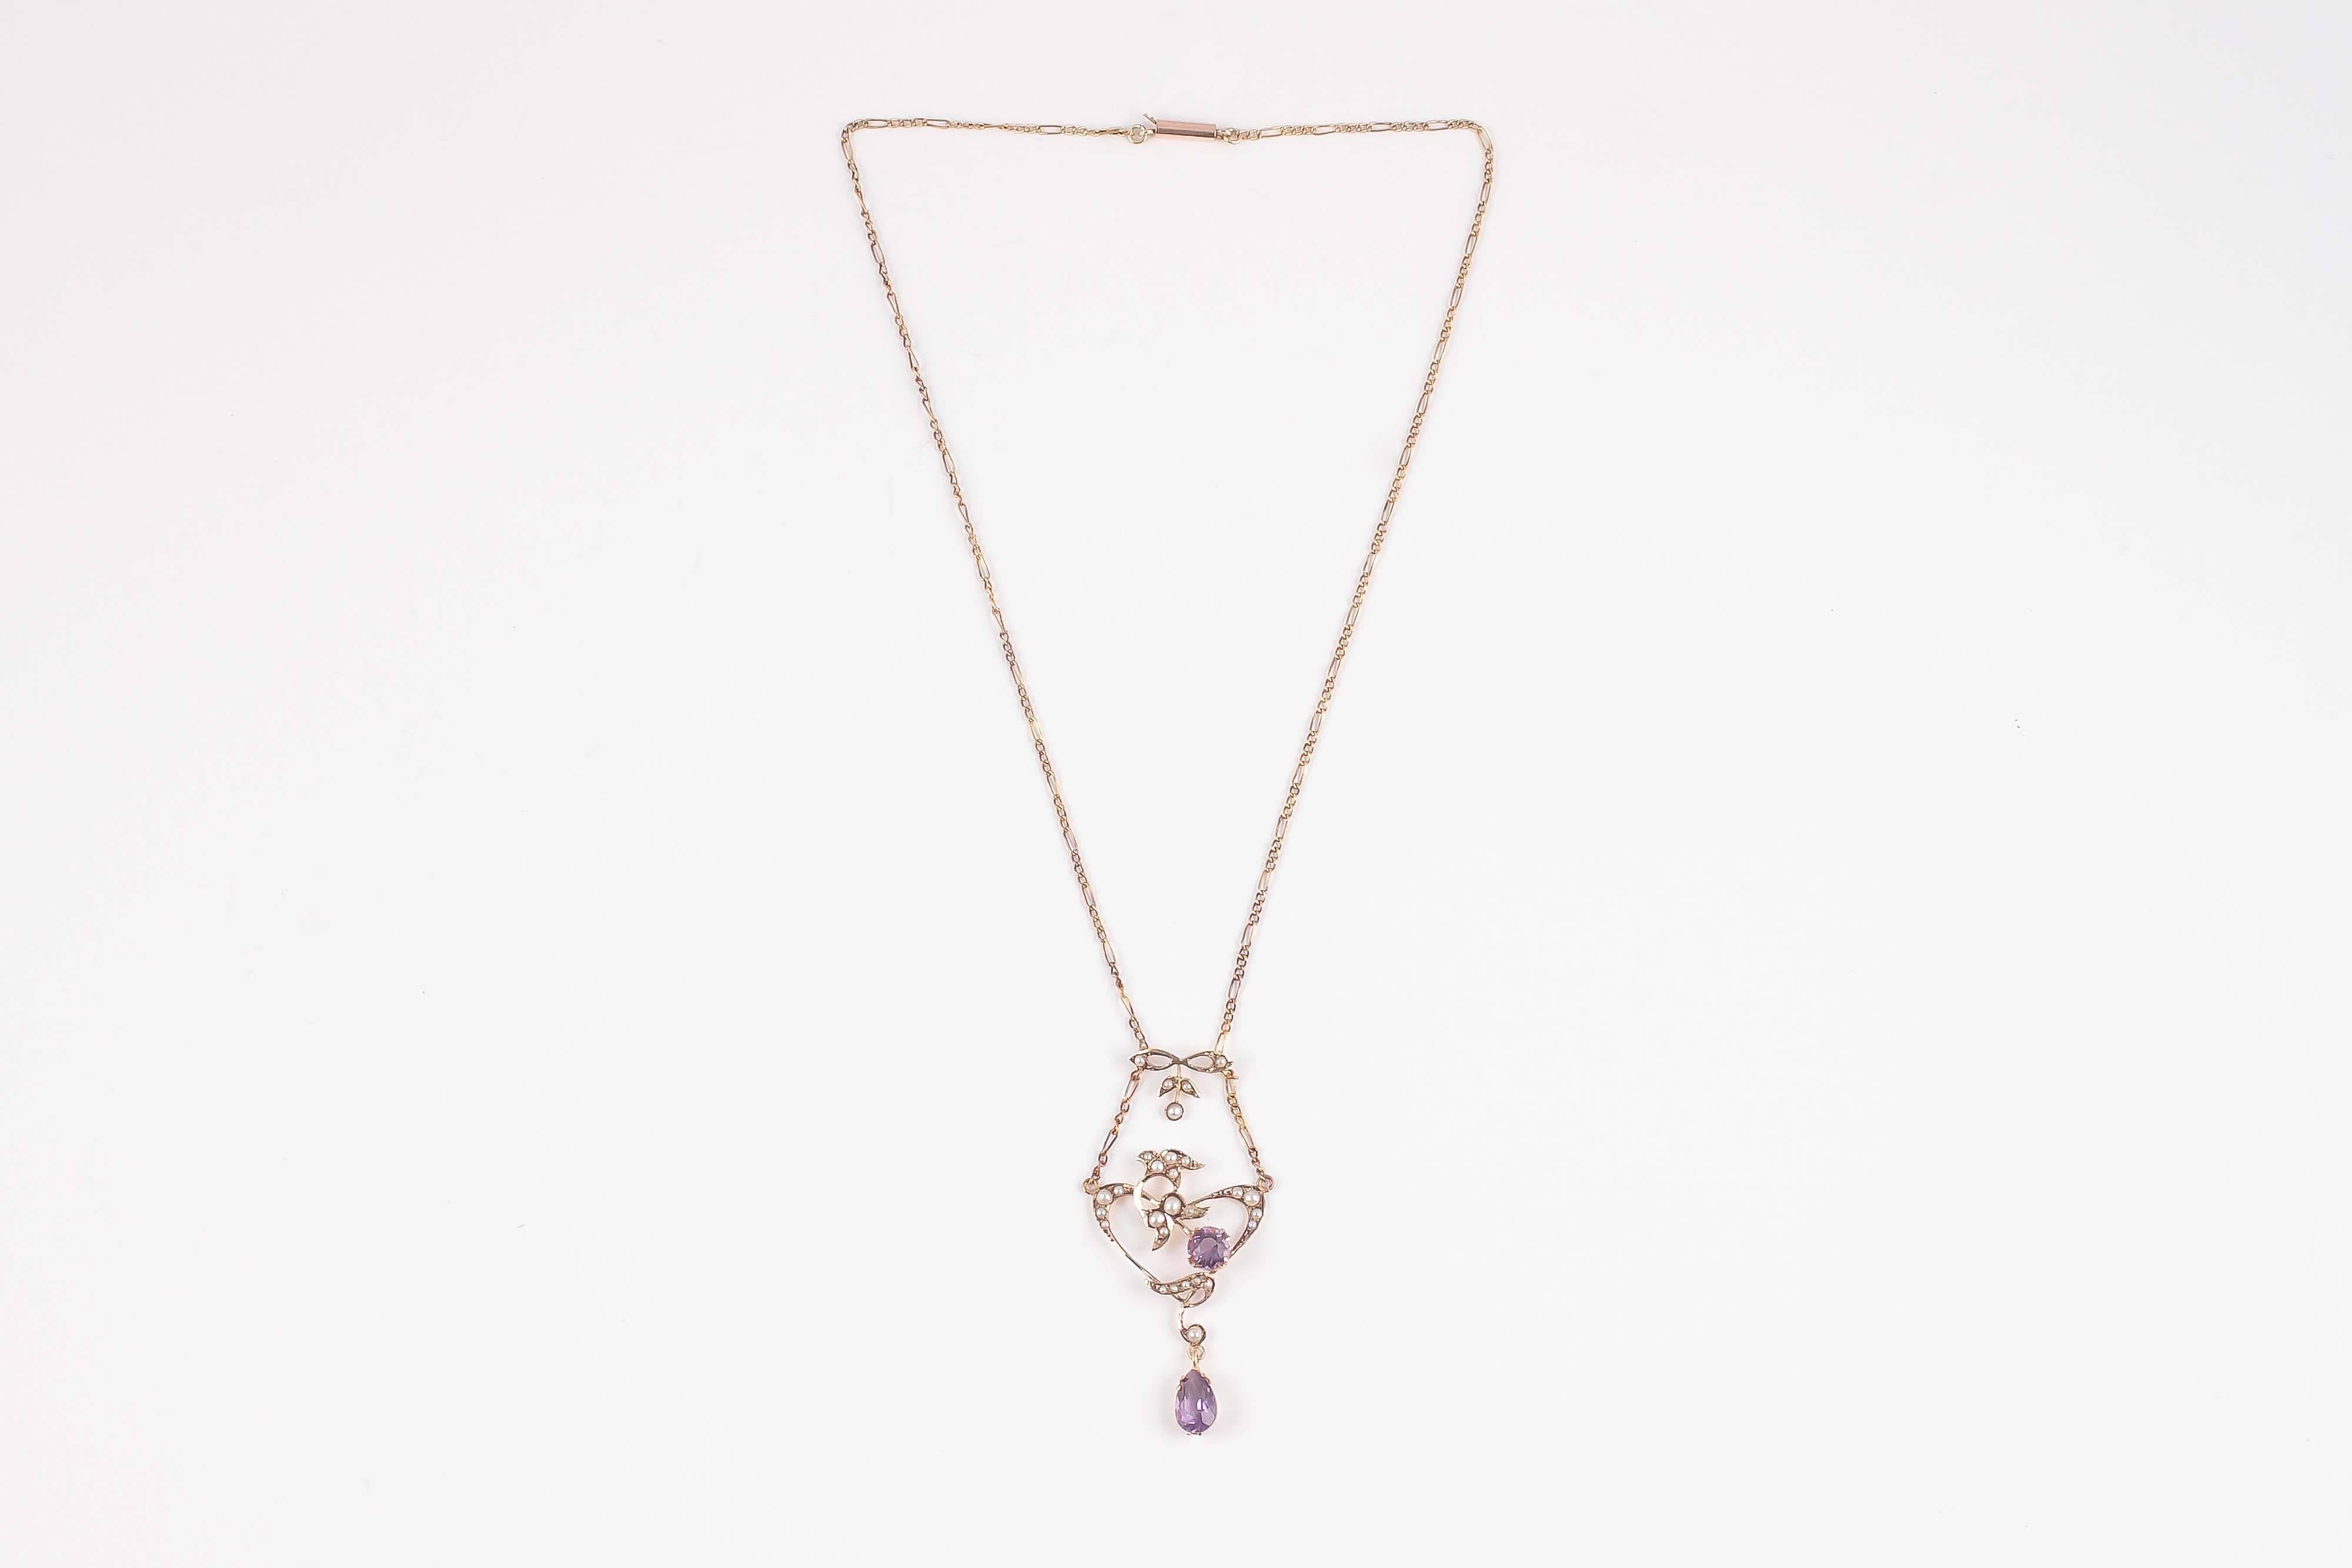 English beauty, delicate and whimsical with amethyst and seed pearls!  Chain is 16 inches.